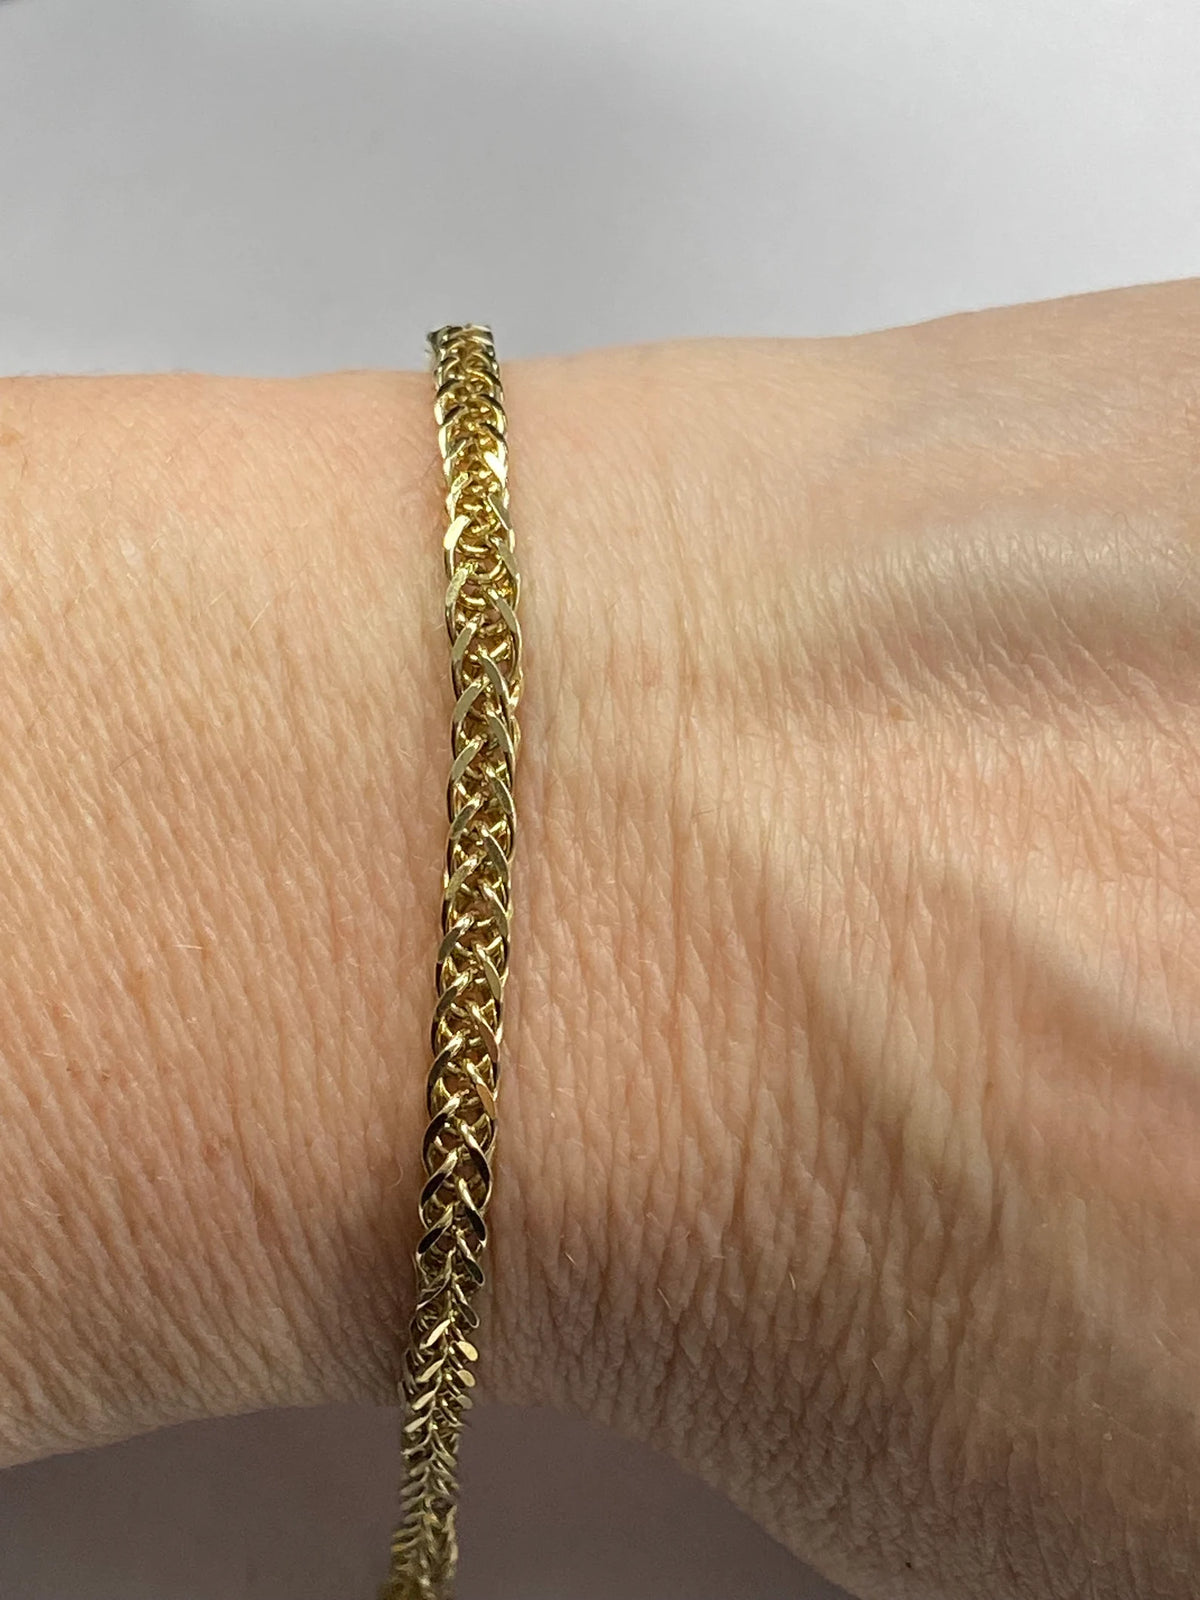 Italian made Gold Plated Sterling Silver Woven Bracelet